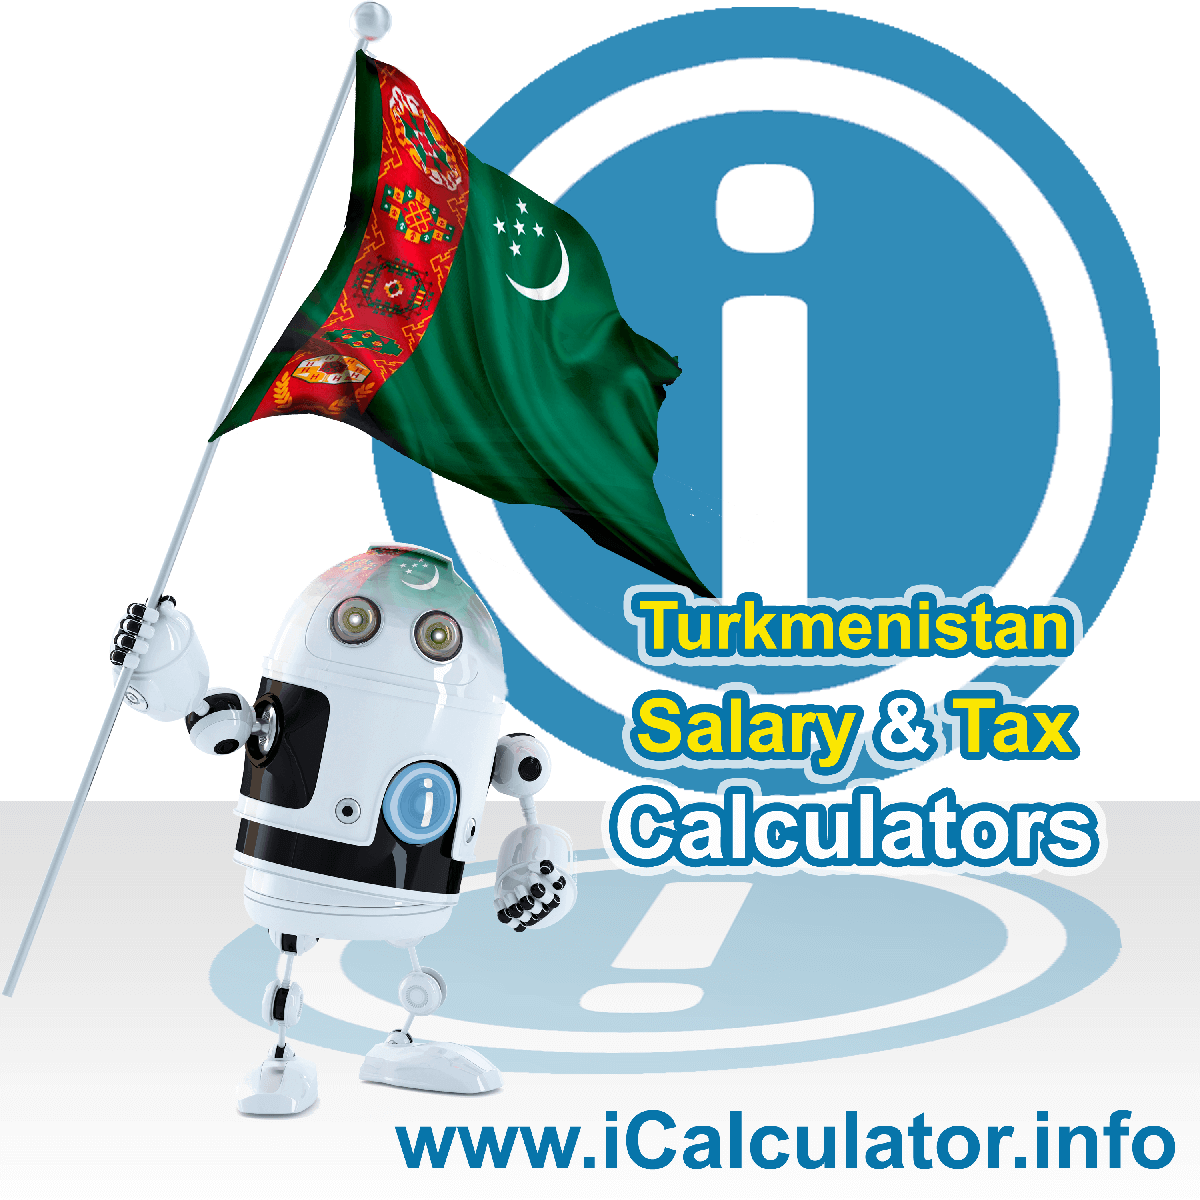 Turkmenistan Wage Calculator. This image shows the Turkmenistan flag and information relating to the tax formula for the Turkmenistan Tax Calculator